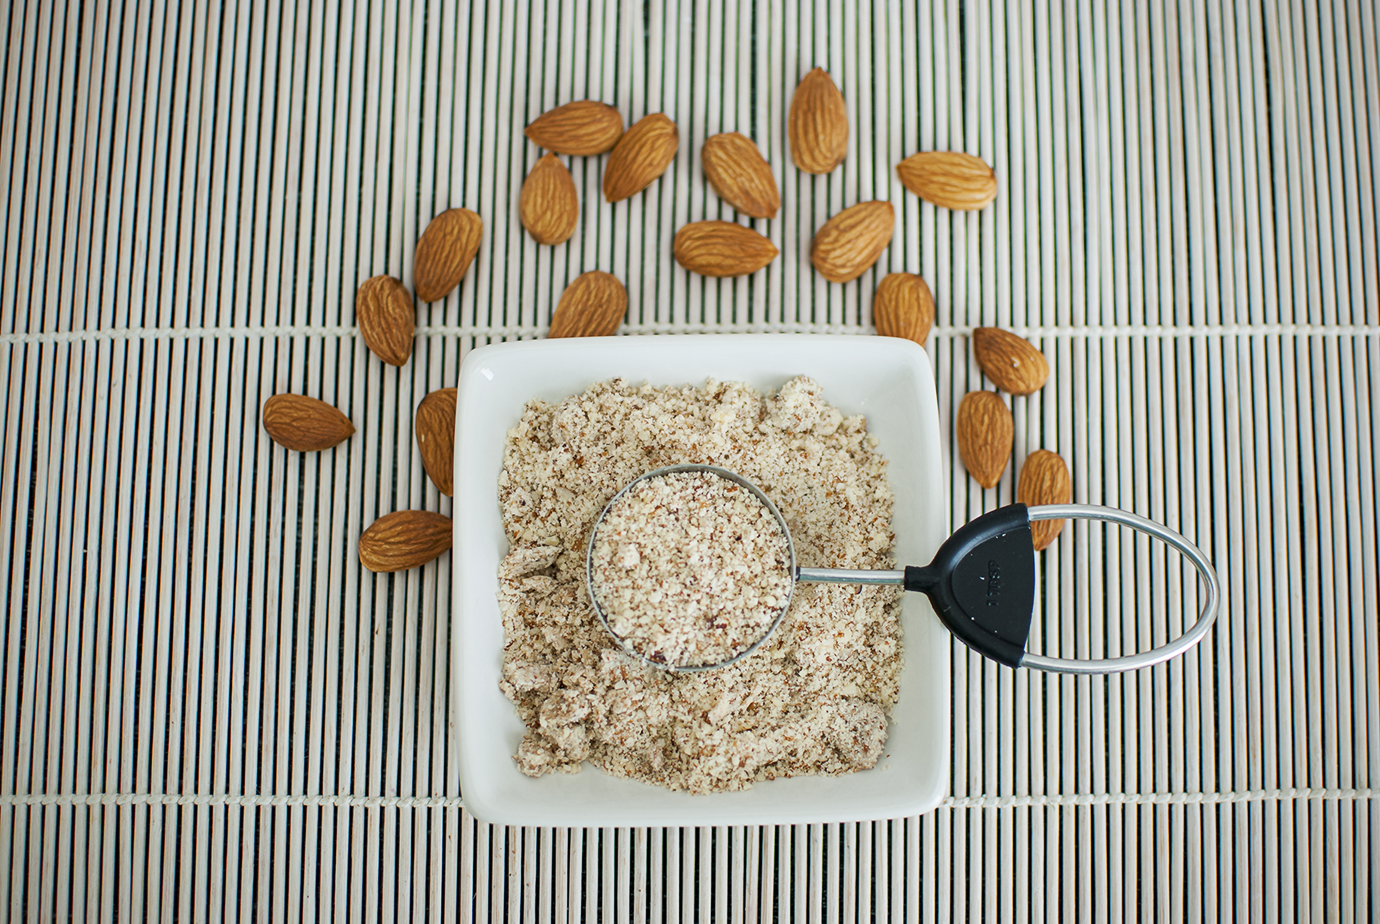 A Tablespoon of Almonds and Almond Meal